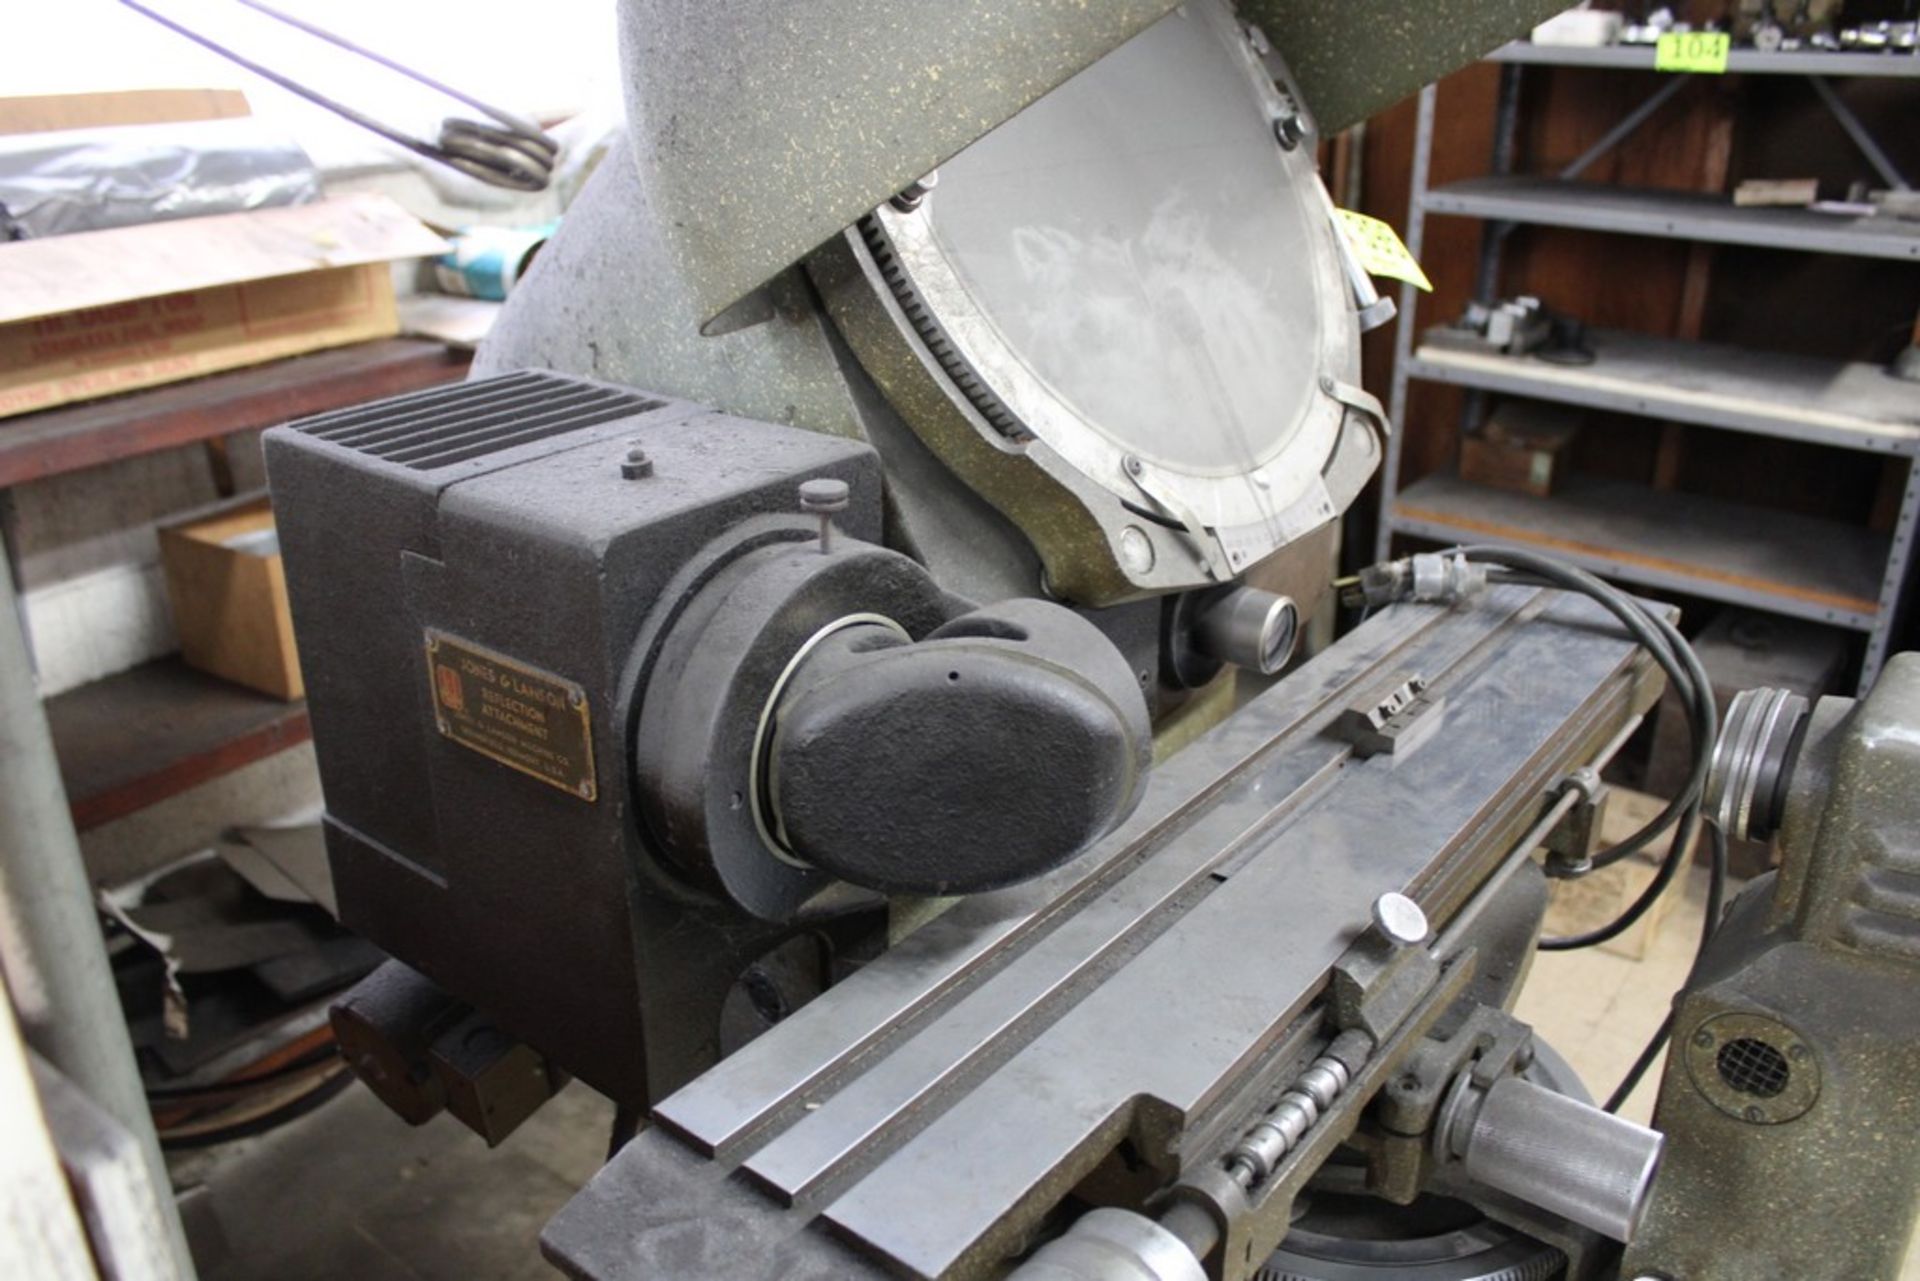 JONES & LAMSON 14" OPTICAL COMPARATOR, S/N E-36988, WITH 10X LENS, REFLECTION ATTACHMENT - Image 6 of 6